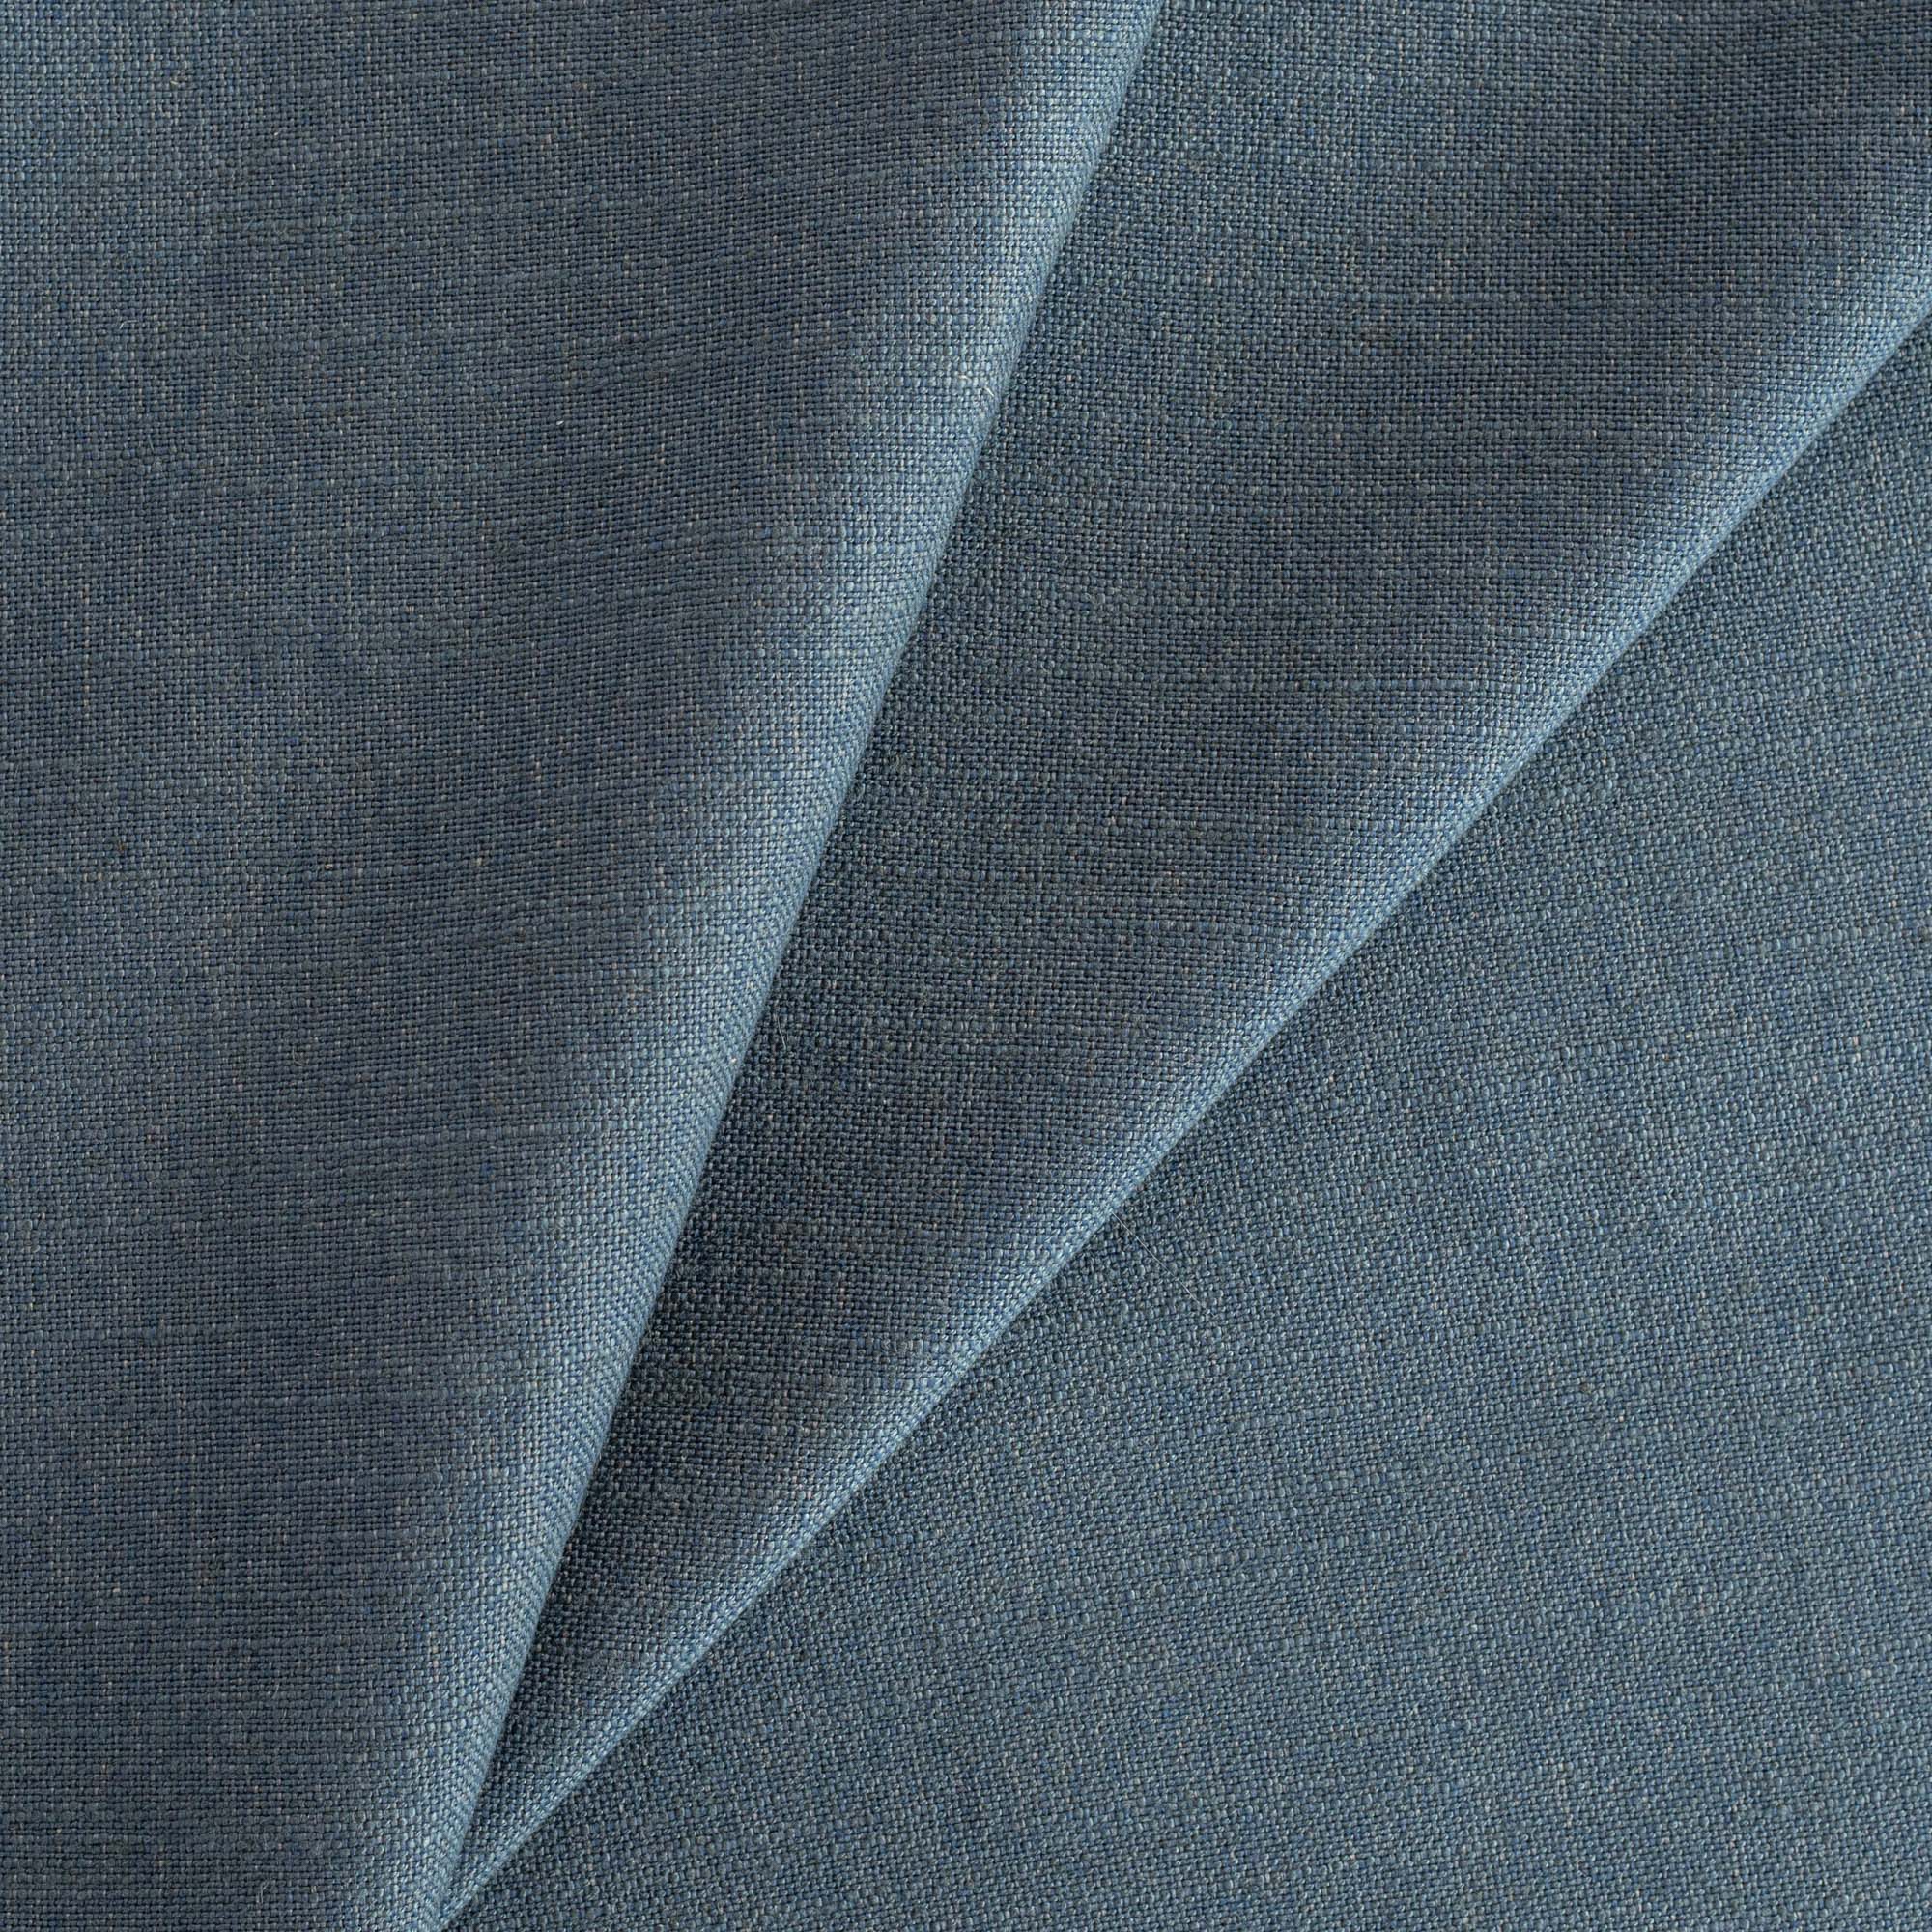 Oxford Fabric Indigo, a solid blue home decor fabric from Tonic Living